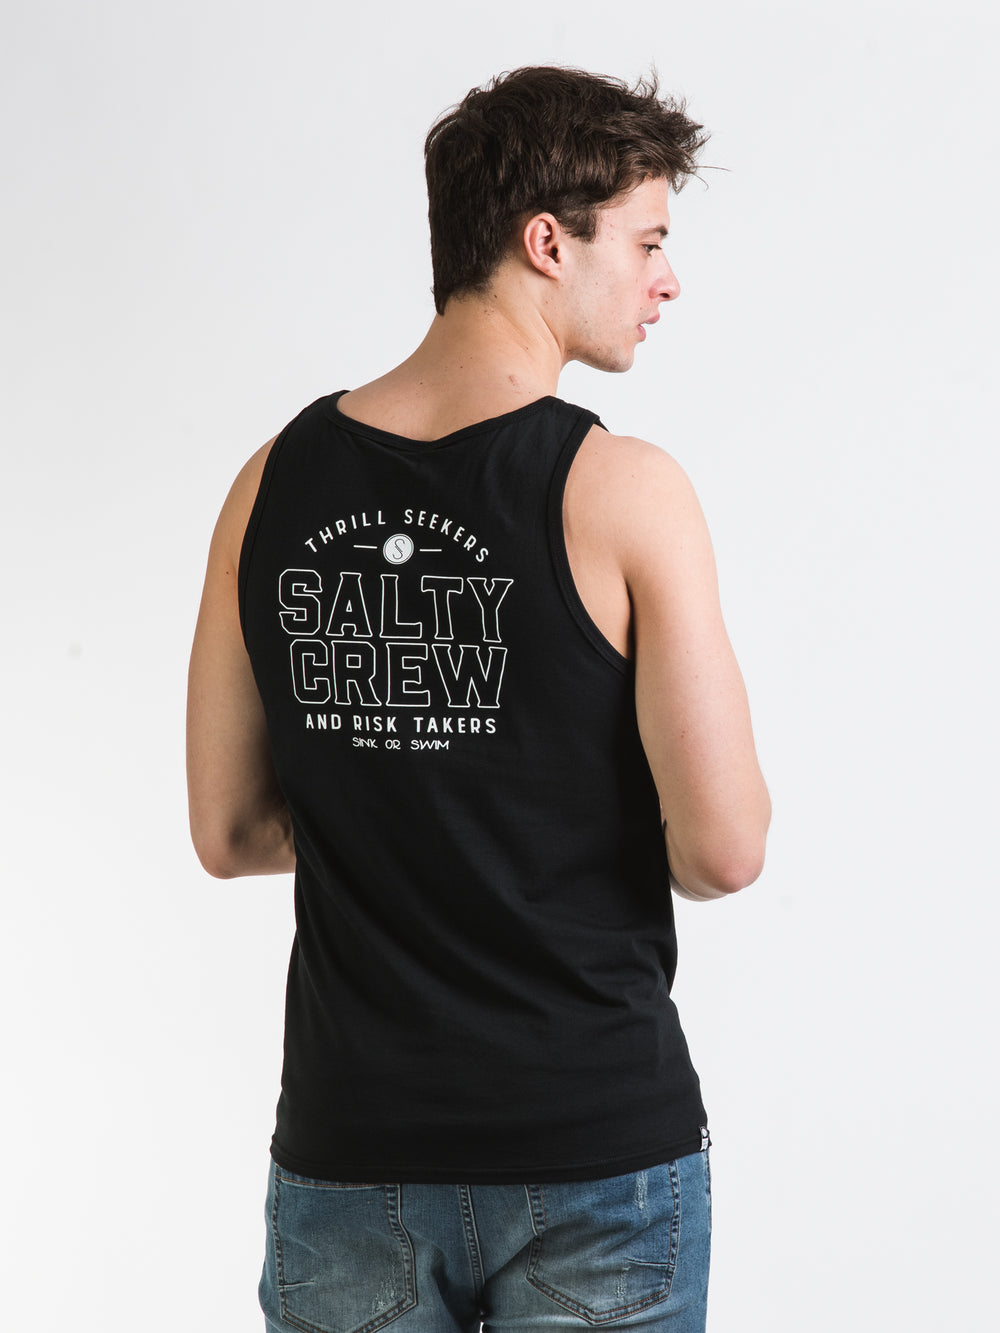 SALTY CREW SPINNER Tank Top - CLEARANCE